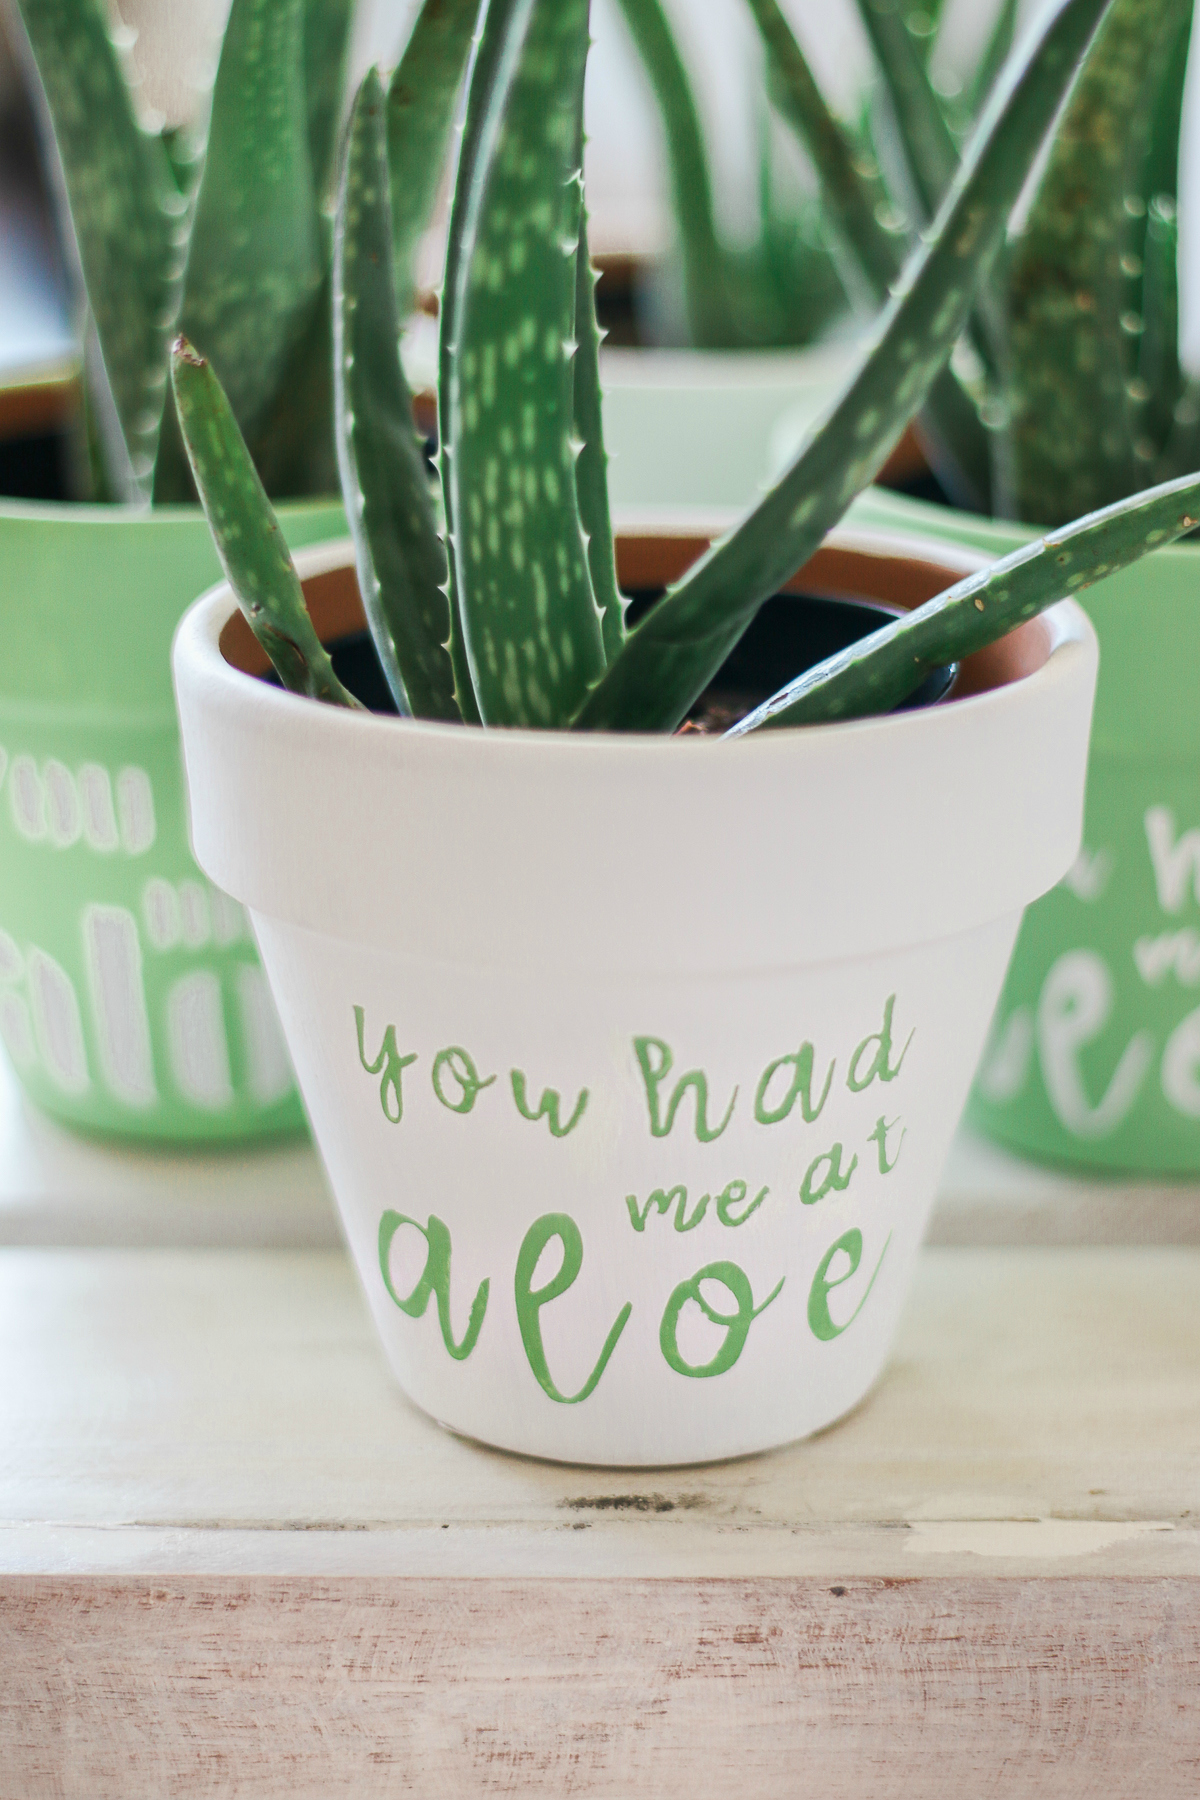 "You Had Me at Aloe" DIY succulent planter by southern blogger Stephanie Ziajka from Diary of a Debutante, gift idea for new neighbors, easy clay pot craft ideas, terracotta ideas, cute aloe vera planter, American Greetings featured artists cards